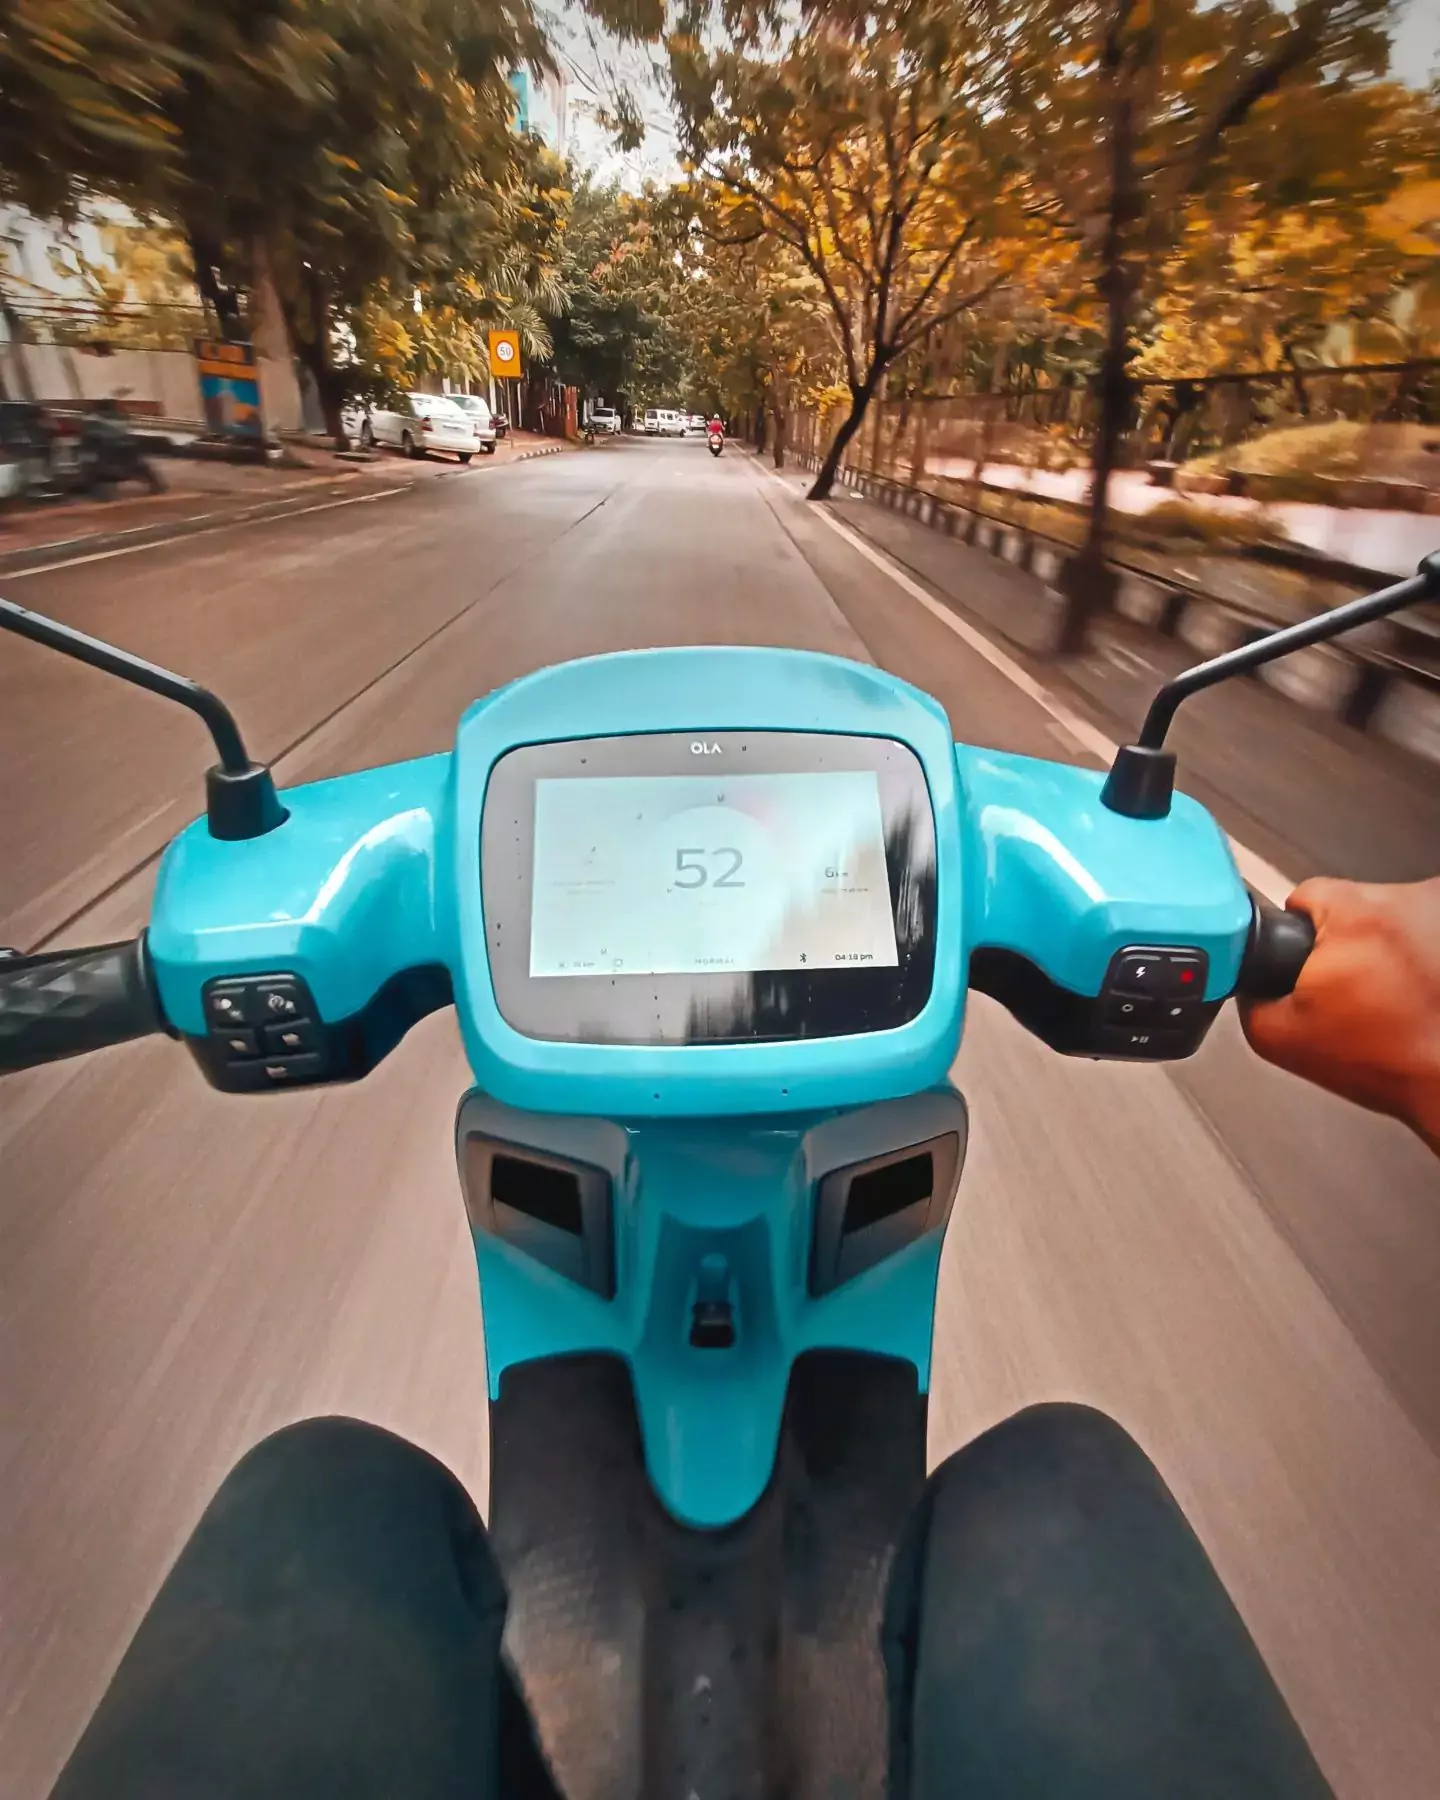 Ola S1 blue color electric scooter sitting pov